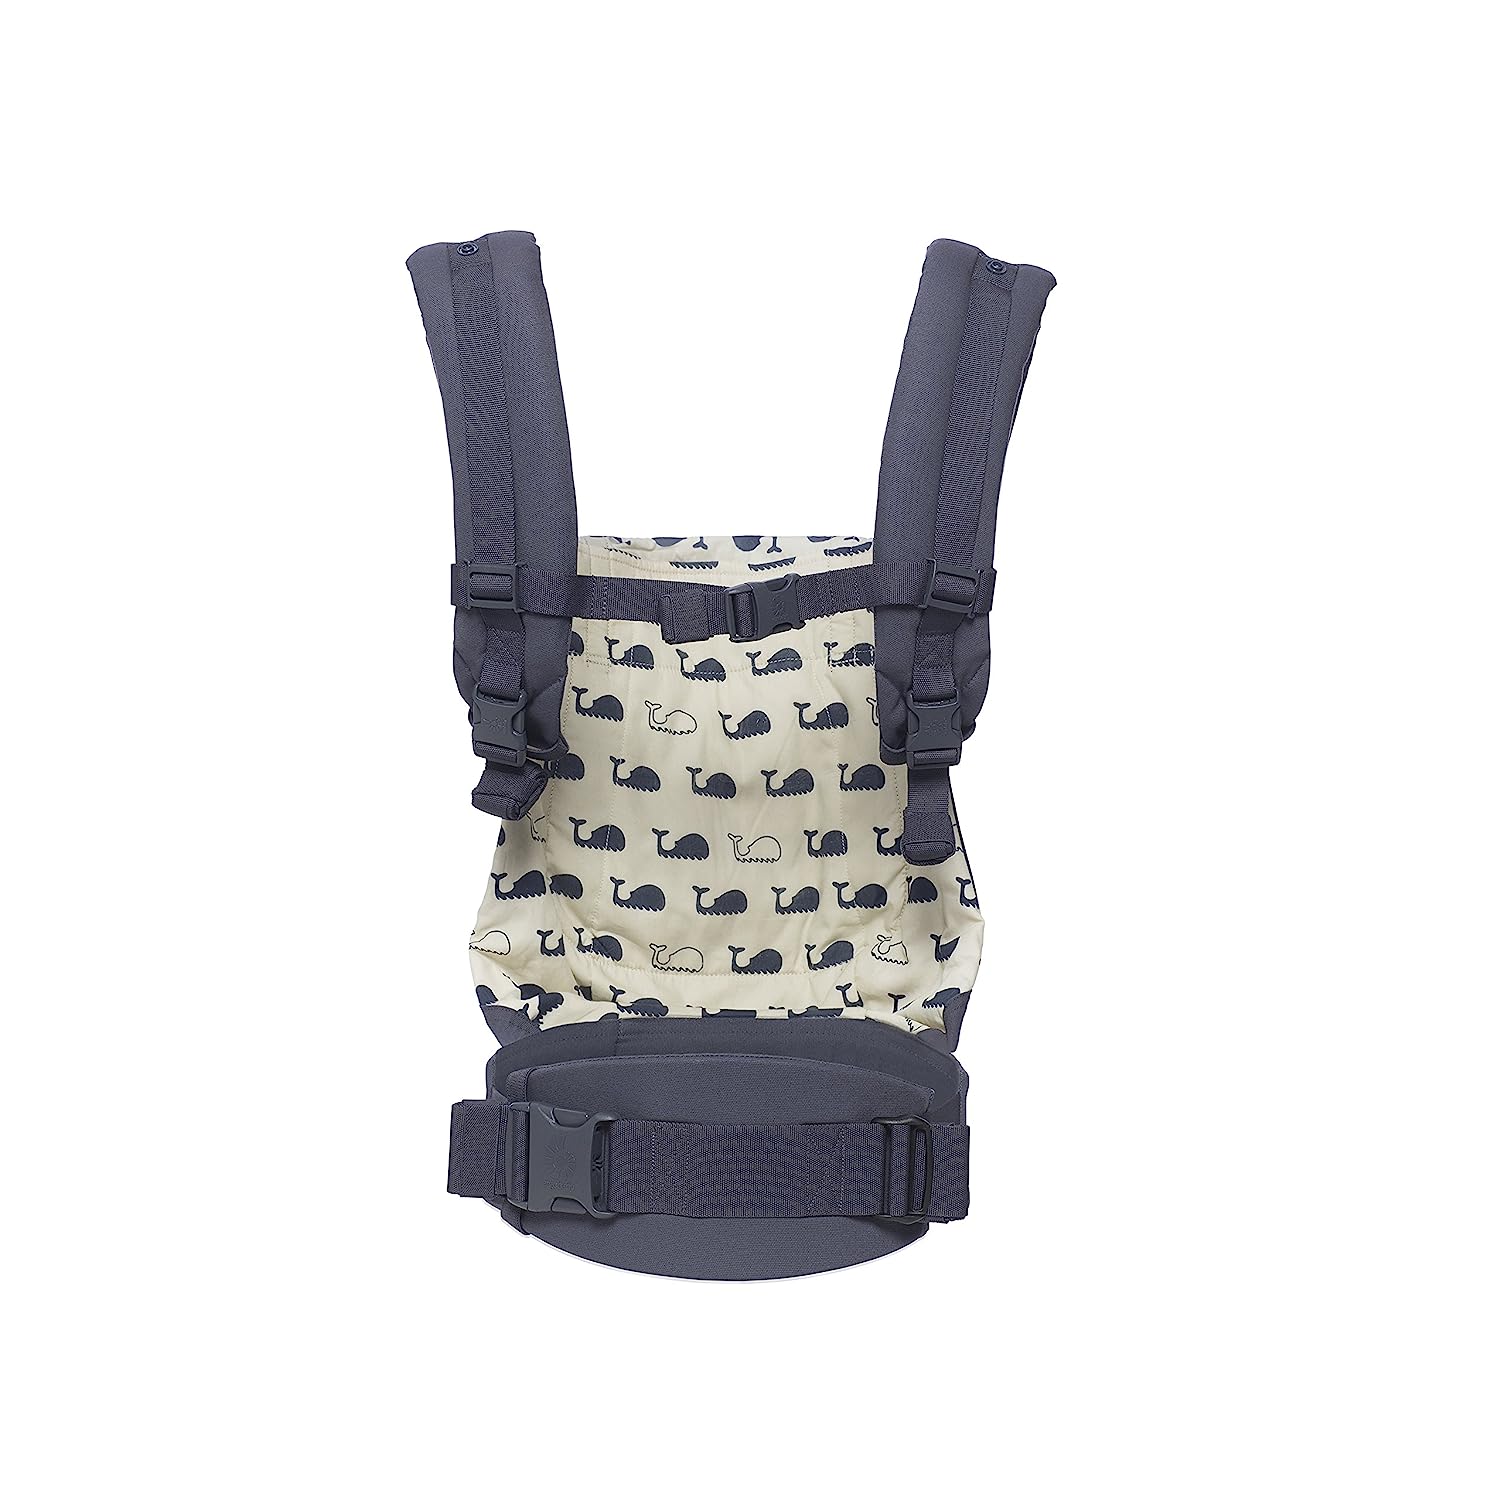 Ergobaby Baby Carrier Original Collection Ergonomic 3-Position Baby Carrier and Back Carrier